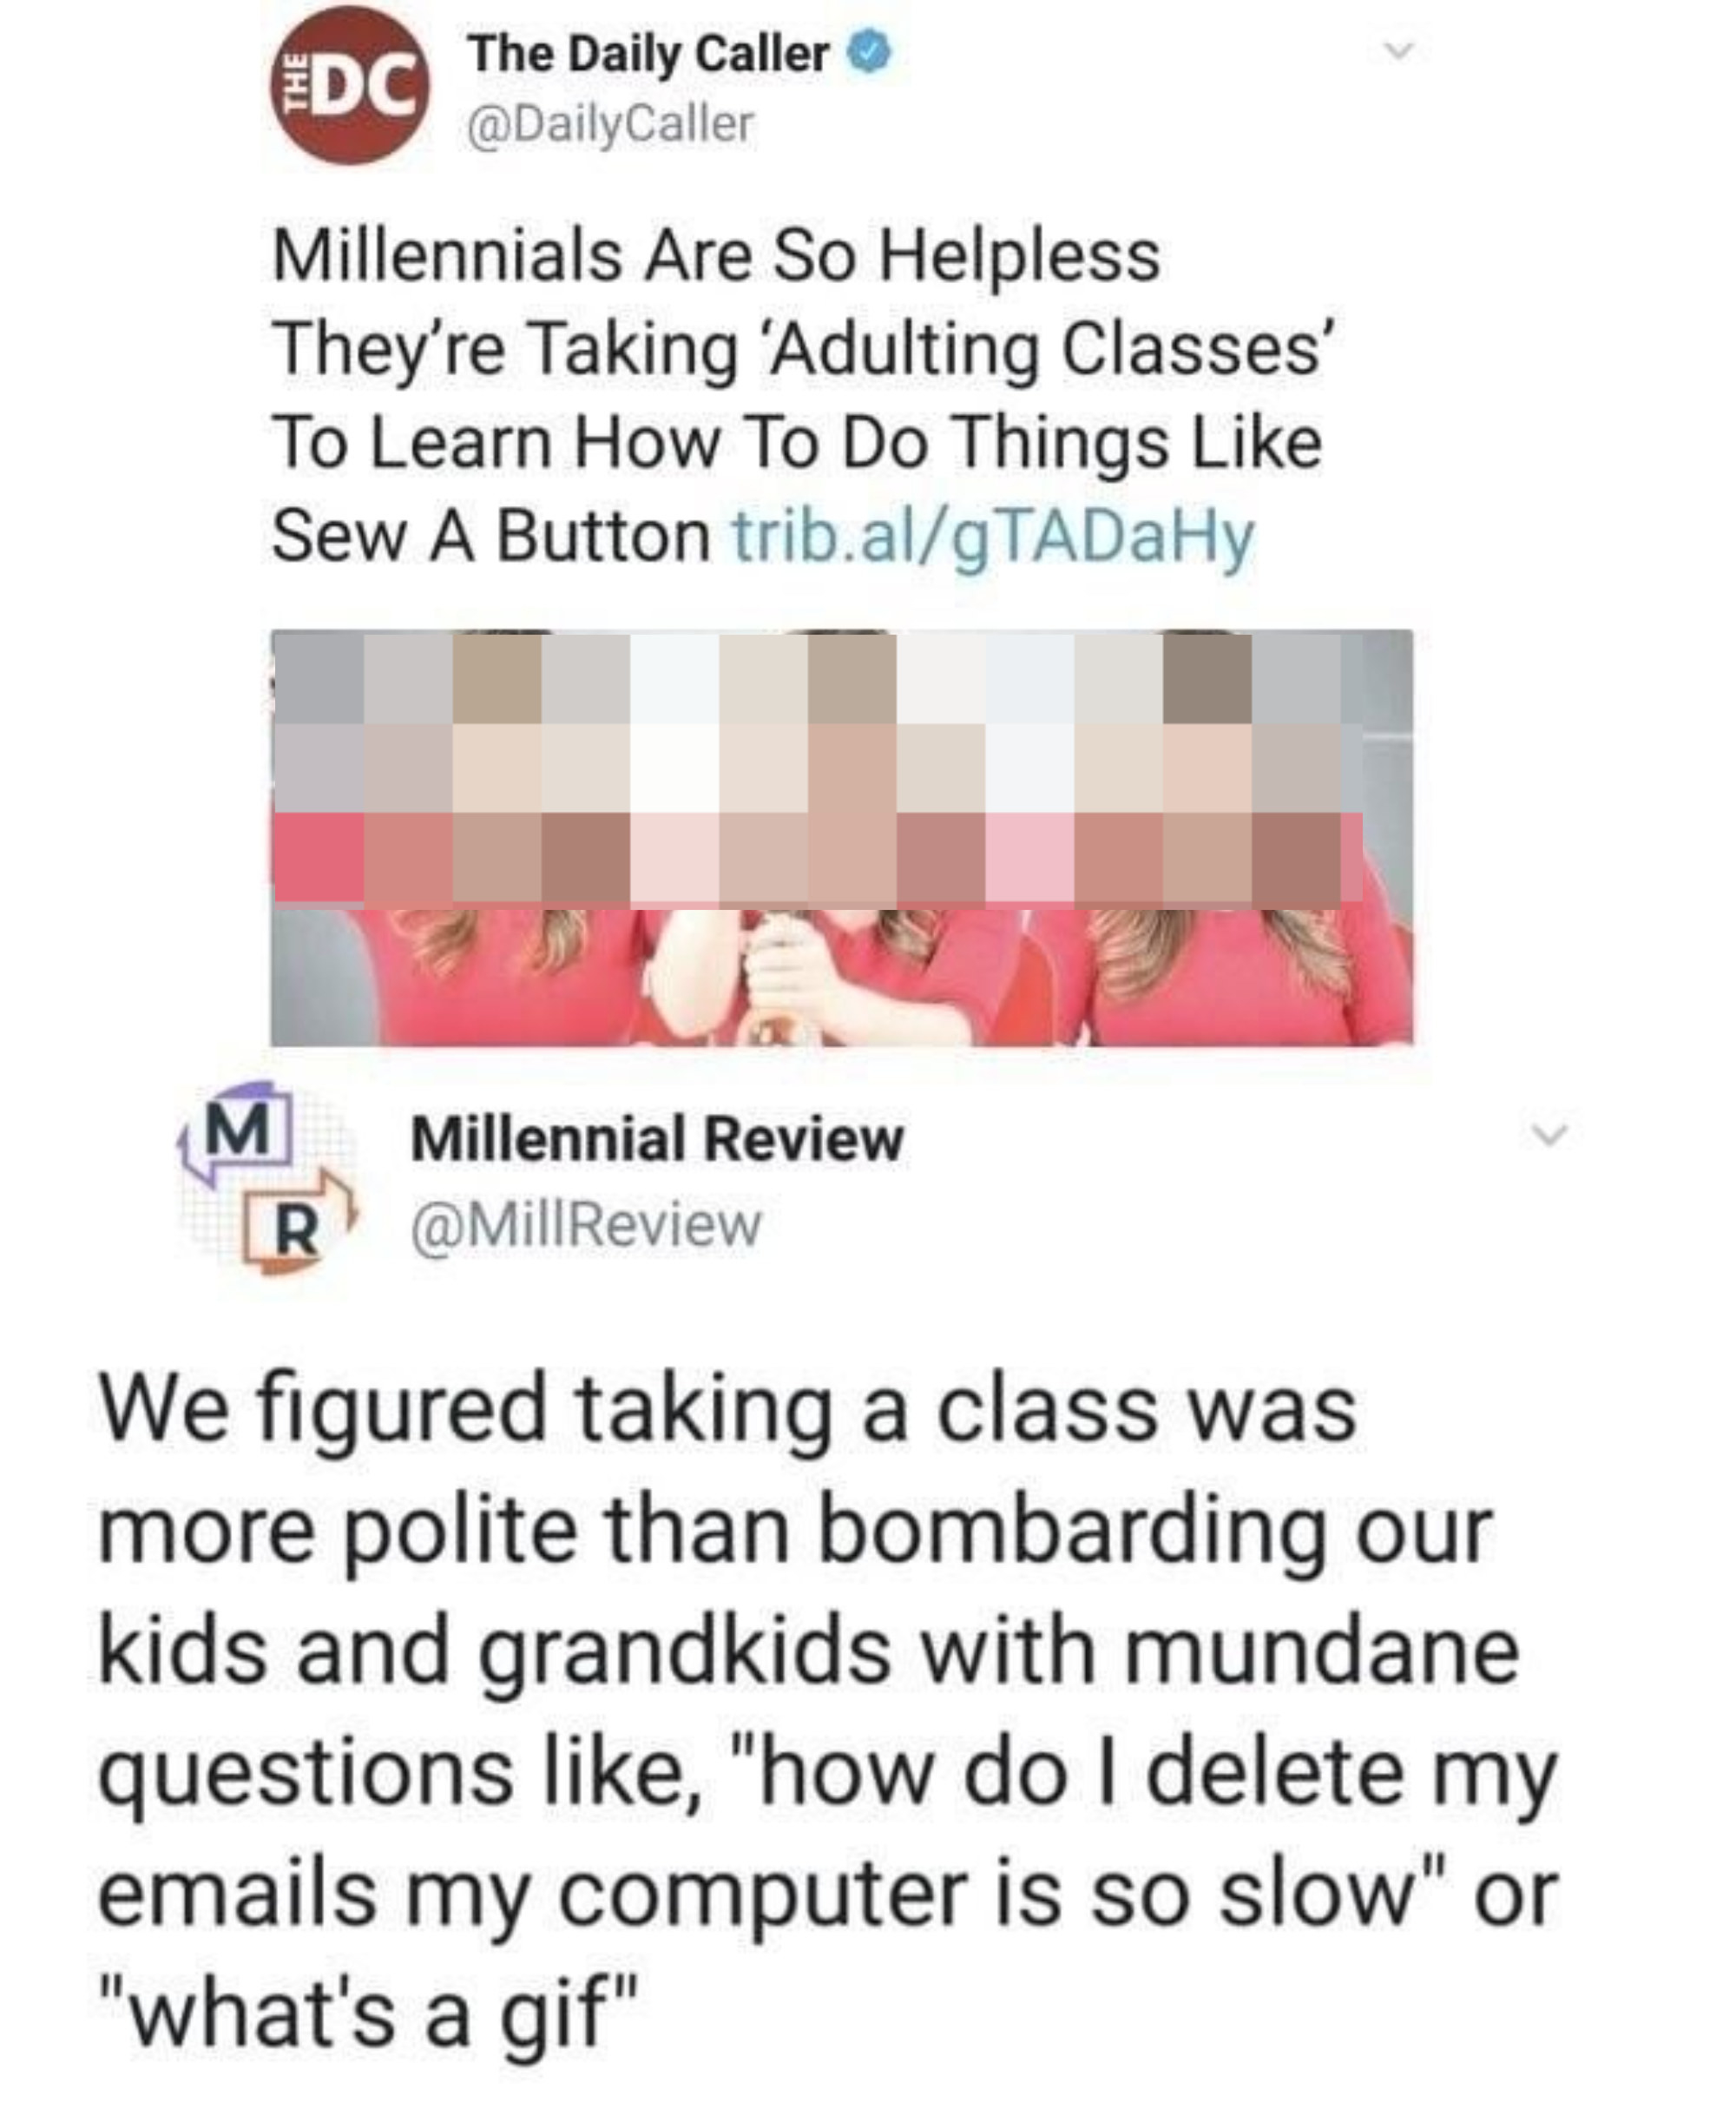 article saying millennials have to take adulting classes and someone responds its better than bombarding people with computer questions like you